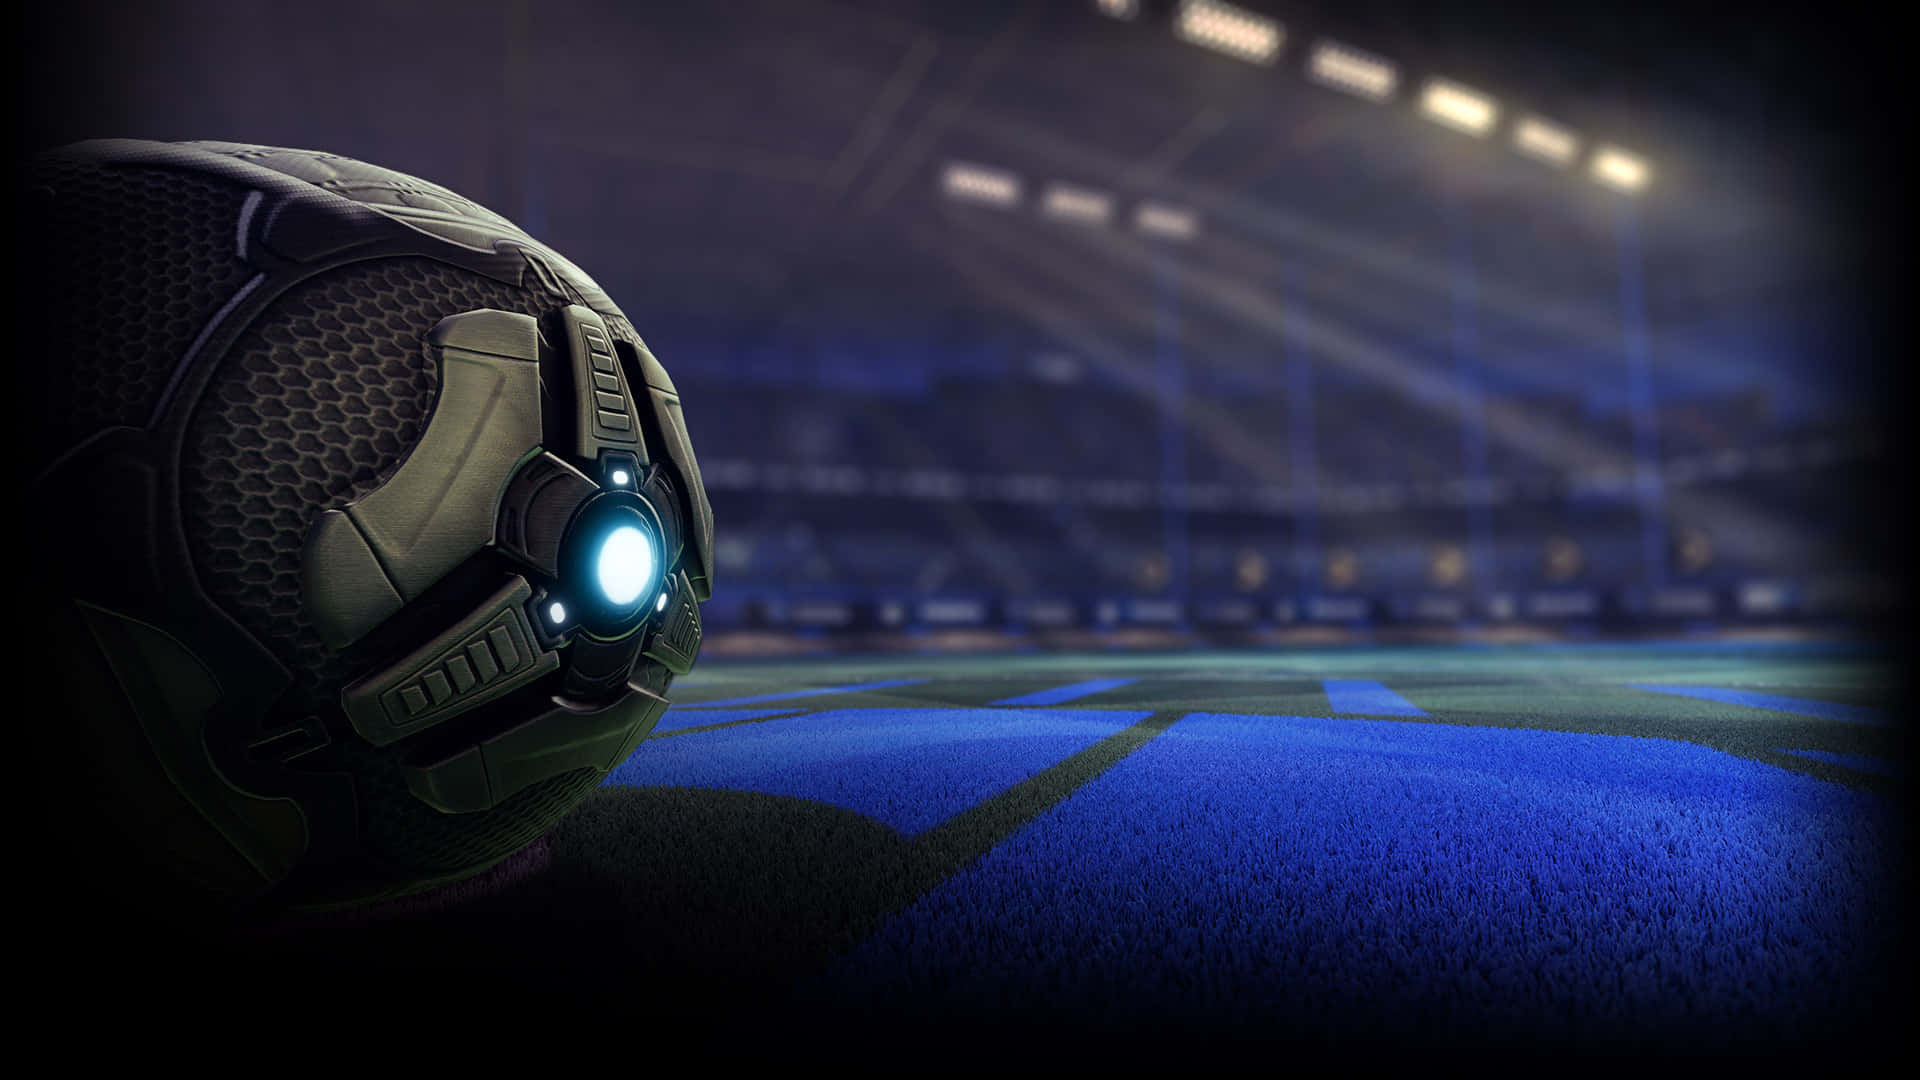 Rev up your engines and get ready to dominate the pitch with 1080p Rocket League